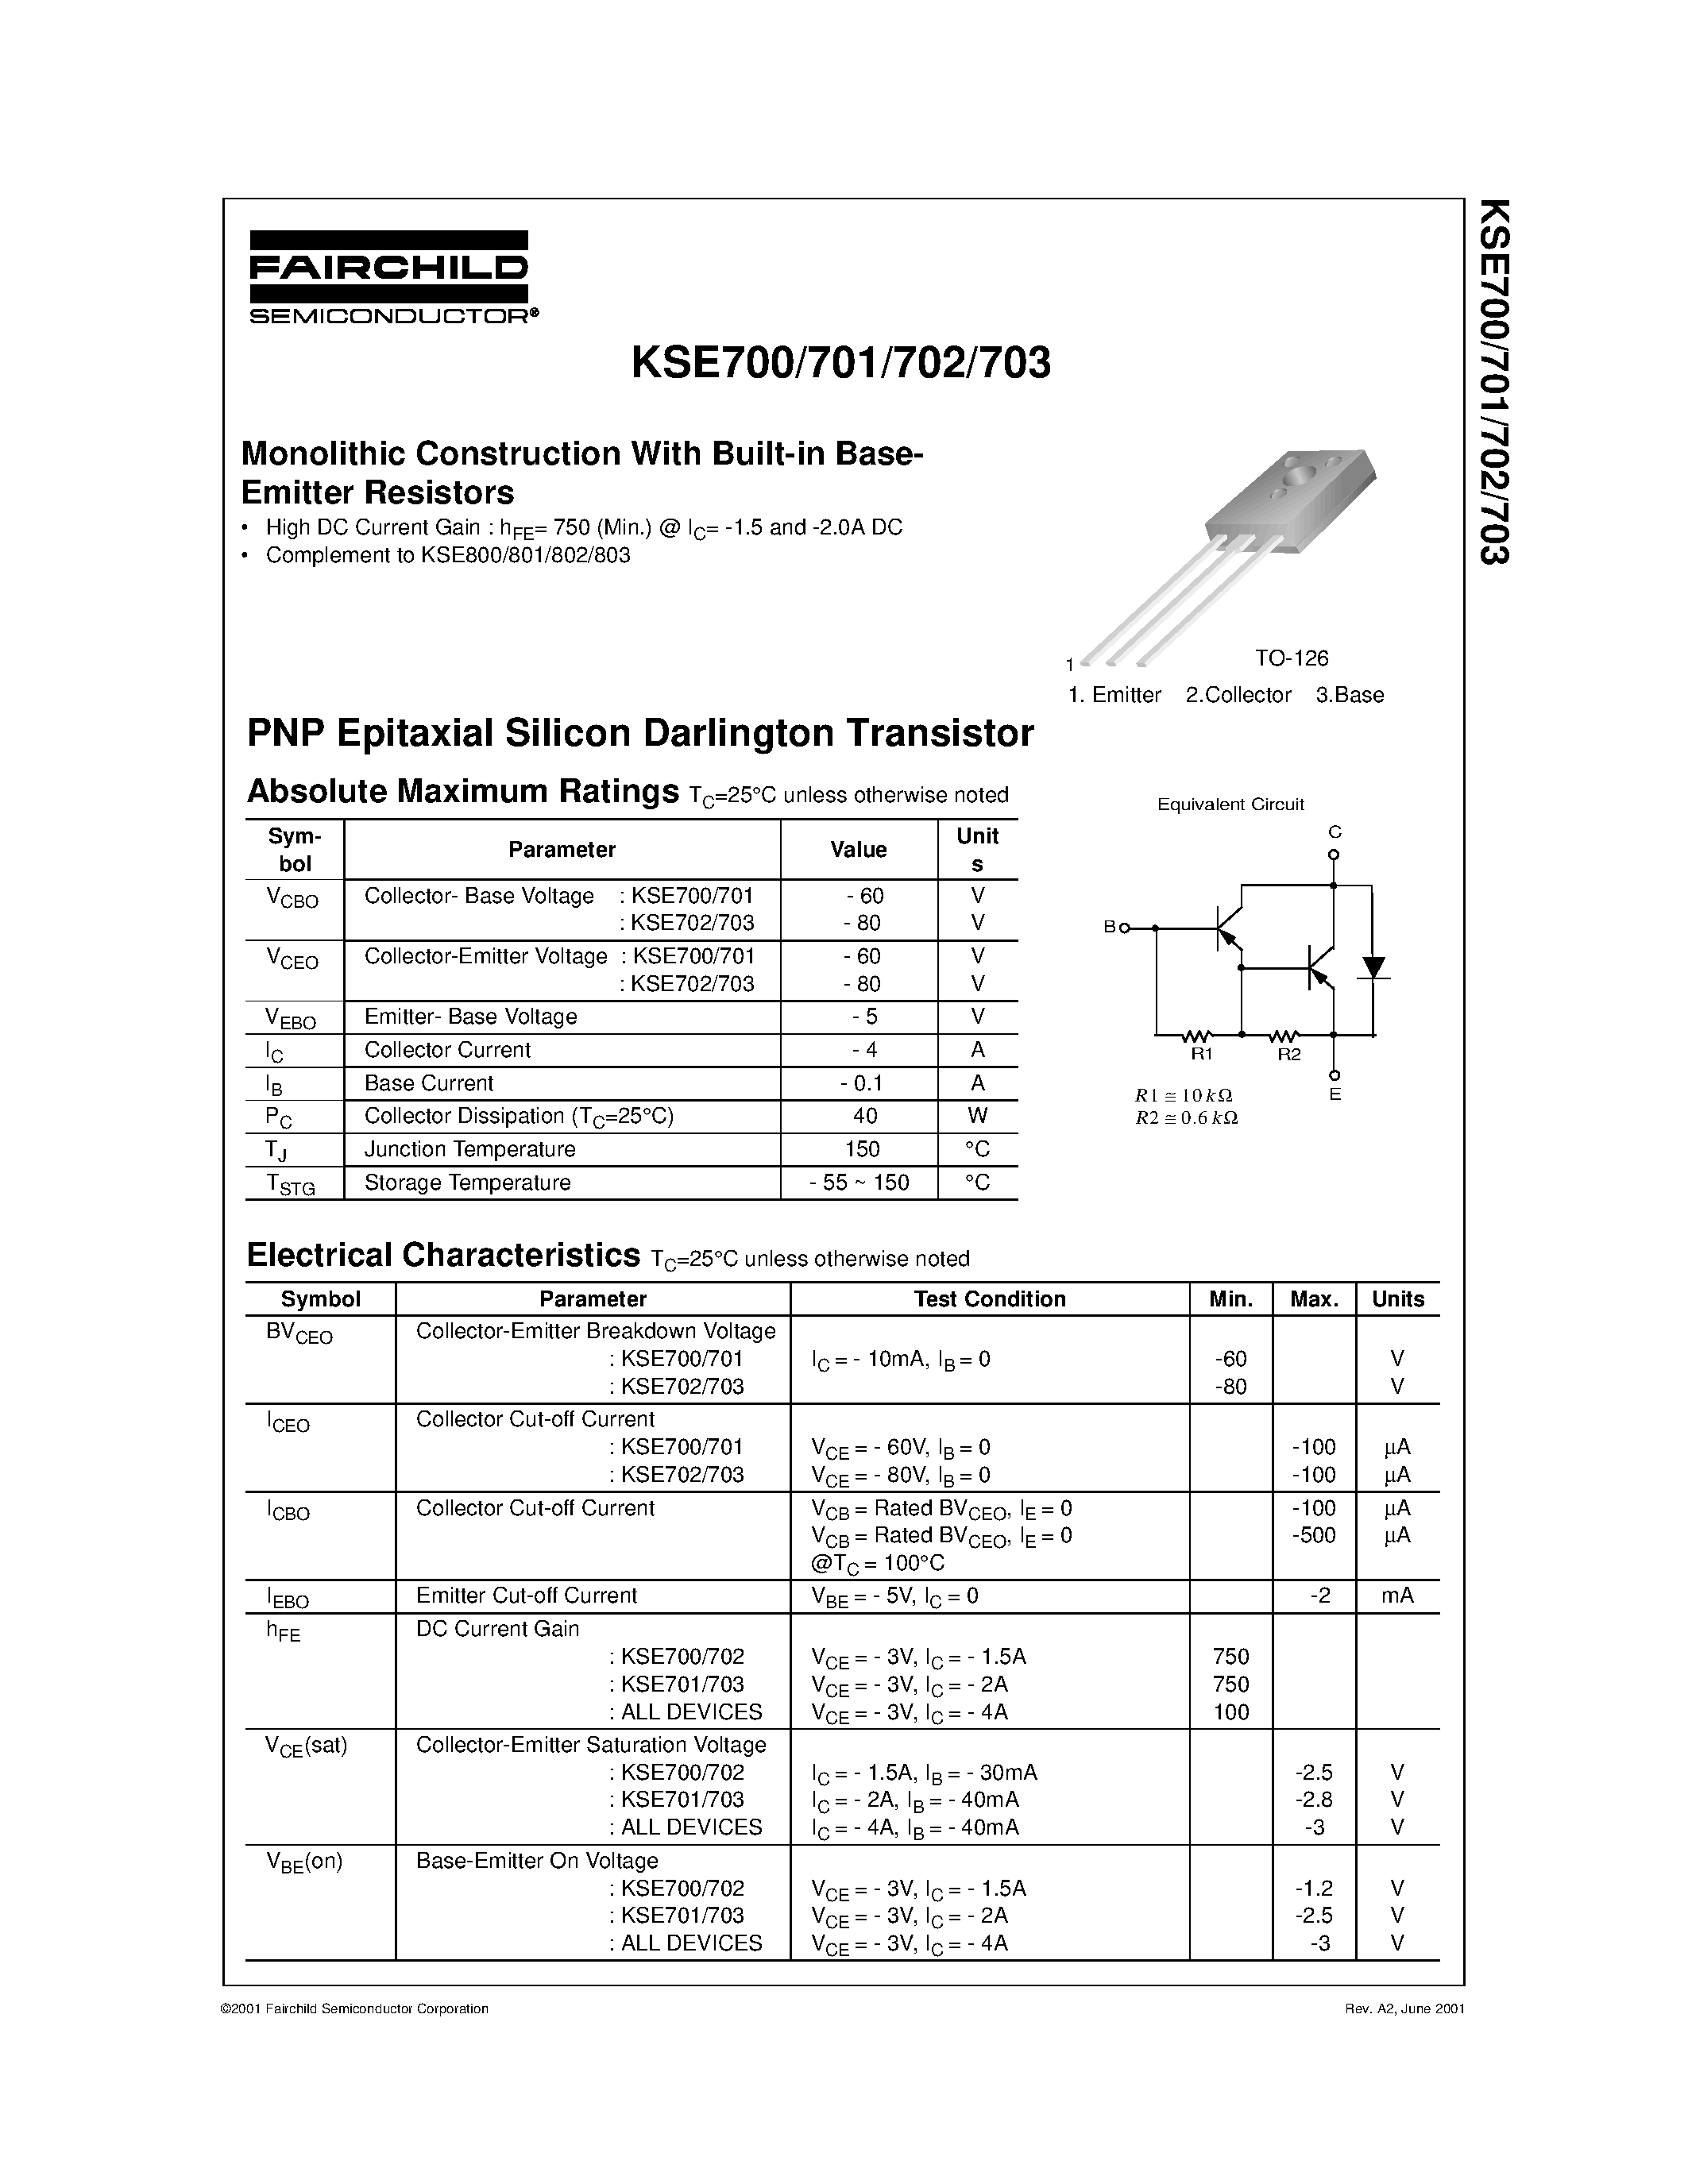 Datasheet KSE701 - Monolithic Construction With Built-in Base- Emitter Resistors page 1